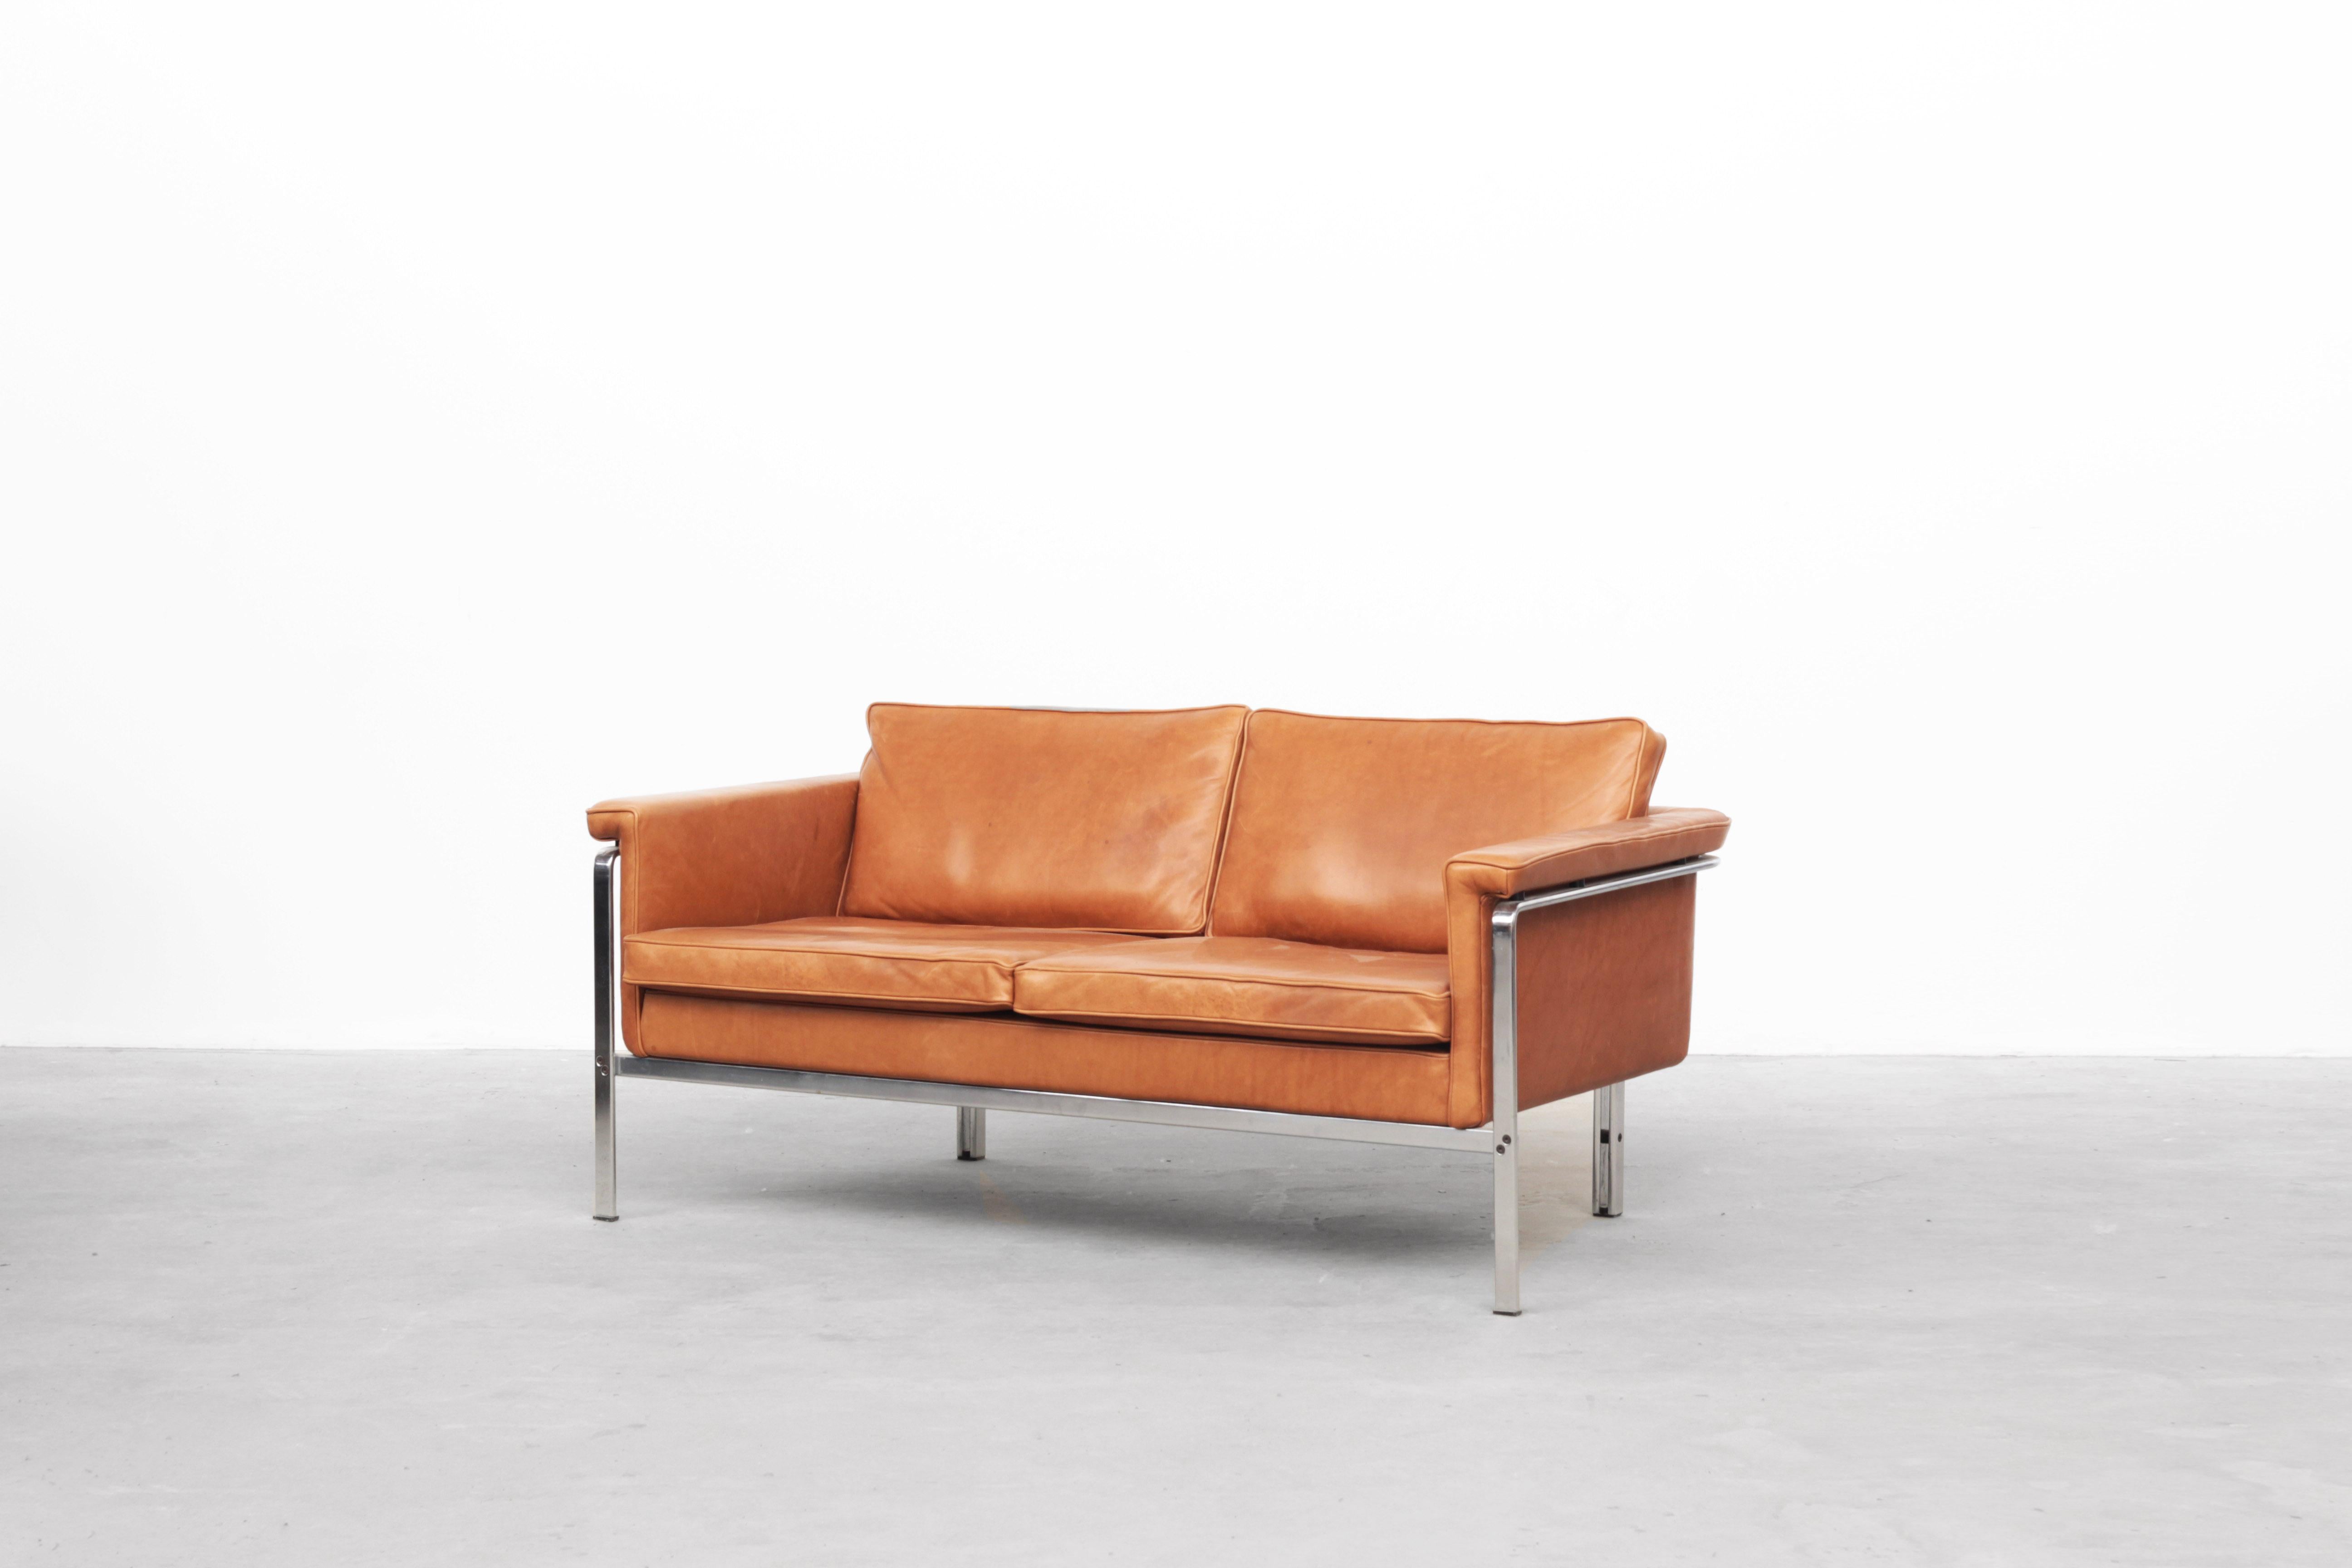 Very beautiful two-seat sofa designed by Horst Brüning and produced by Alfred Kill International in Germany, circa 1968.
This sofa is in excellent condition, without any signs of usage. The cushions and the entire body were newly reupholstered with